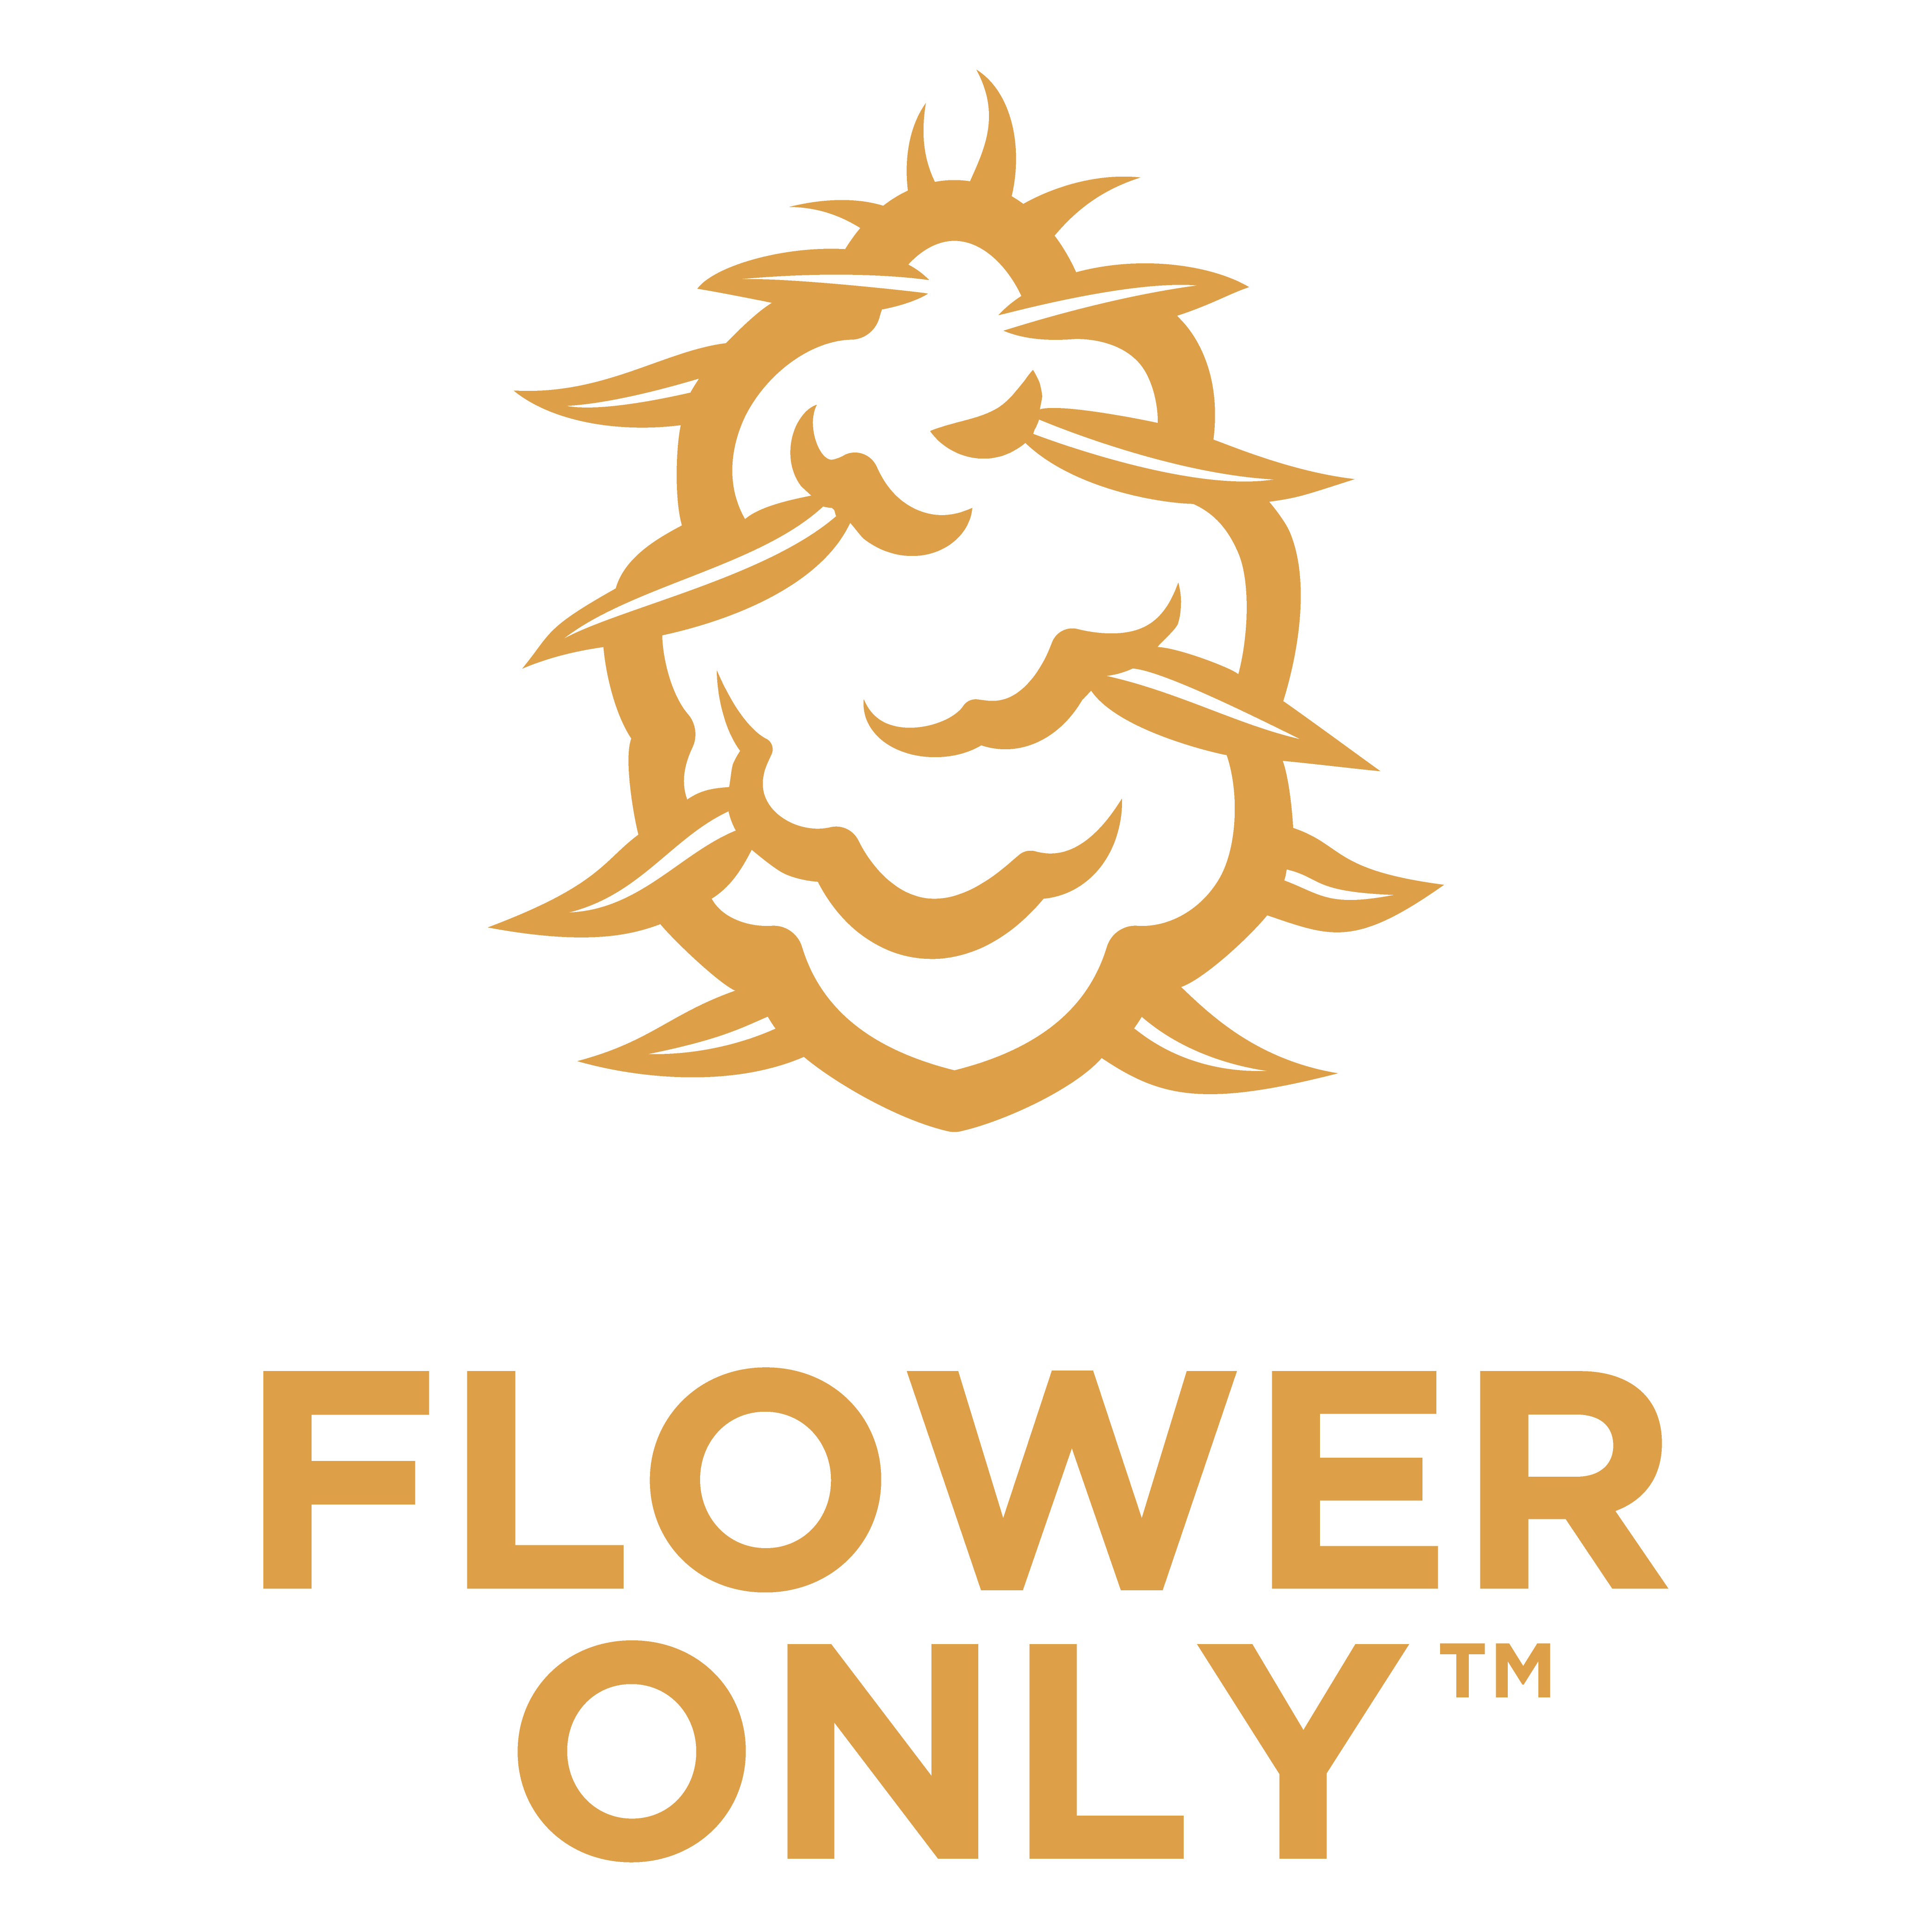 Made with Flower Only